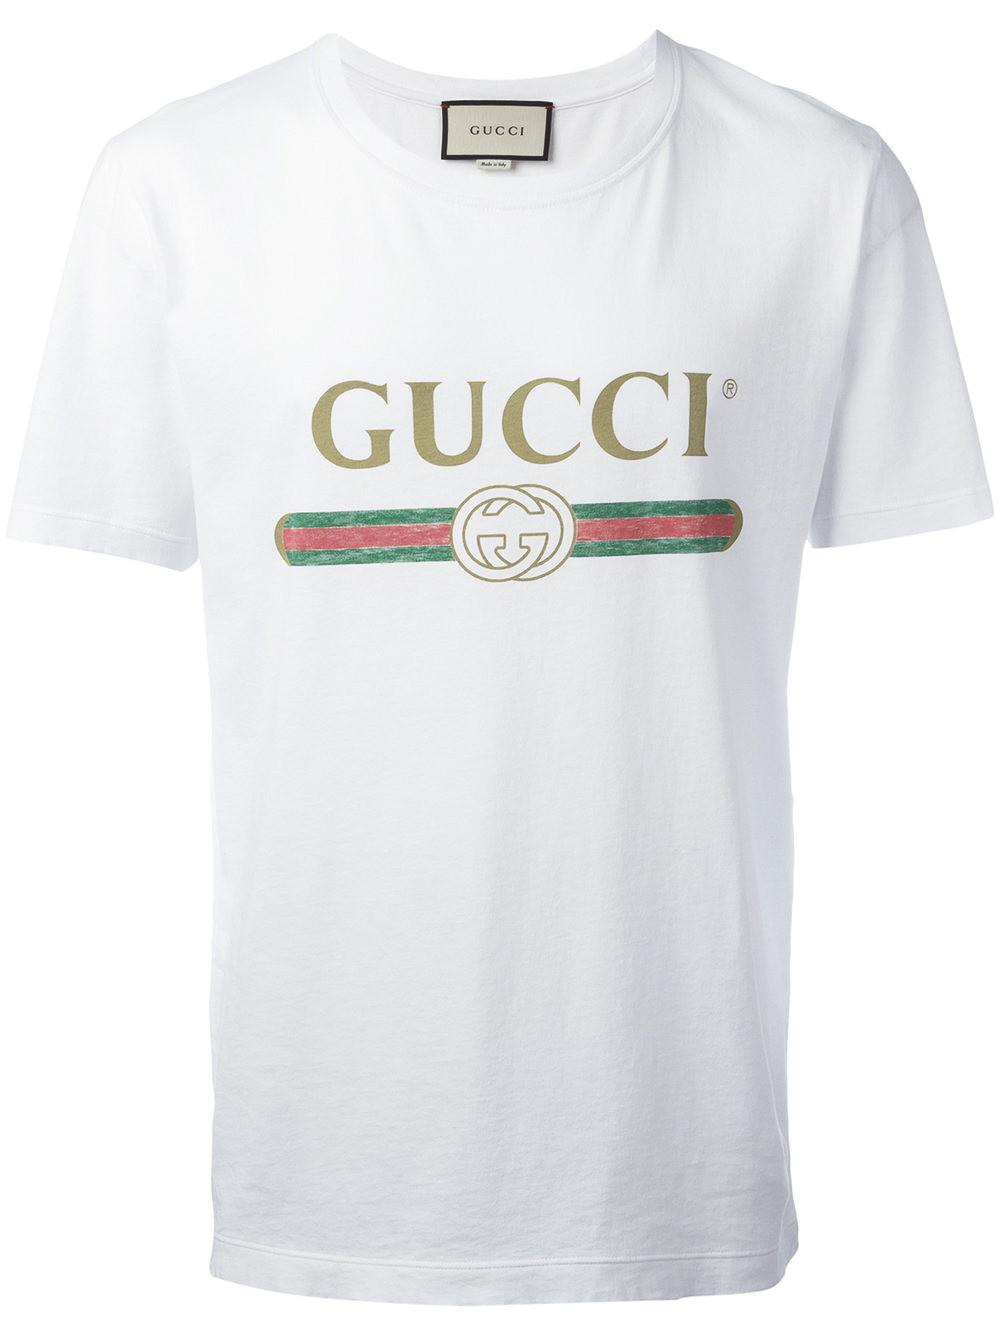 Gucci Cotton Washed T-shirt With Print in Black for Men - Lyst